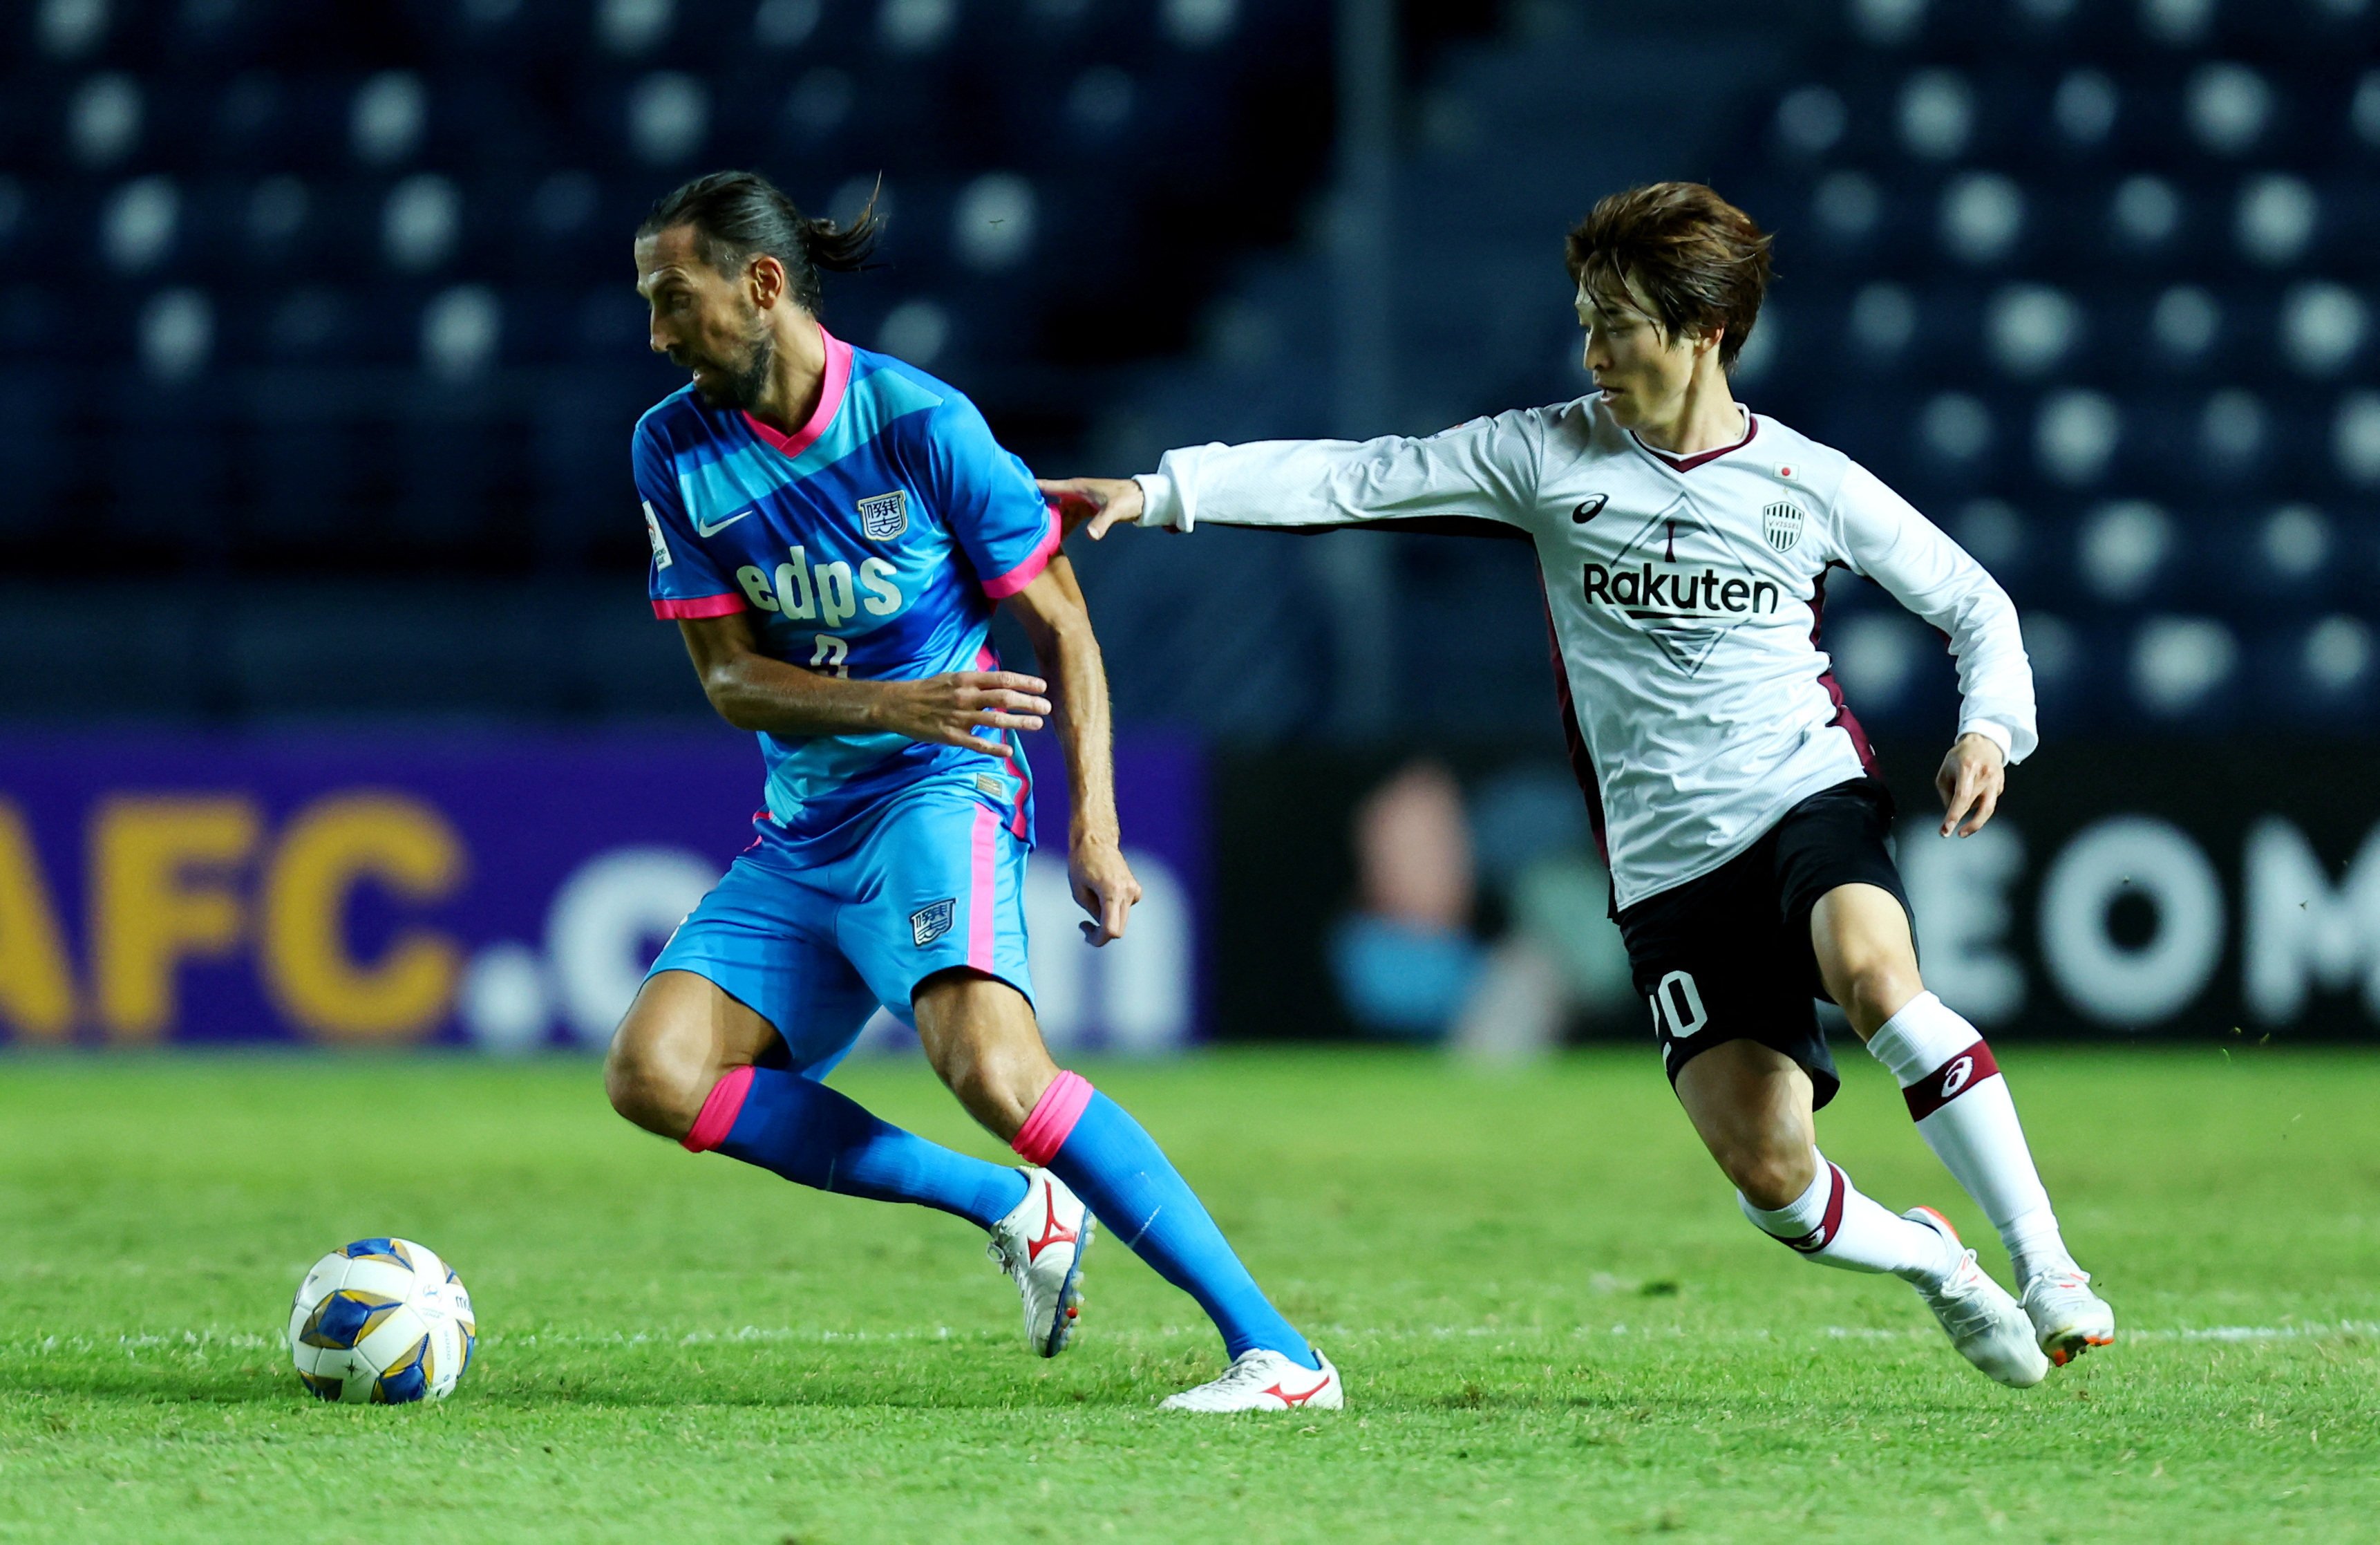 Kitchee’s Dejan Damjanovic in action with Vissel Kobe’s Shion Inoue in the AFC Champions League. Photo: Reuters